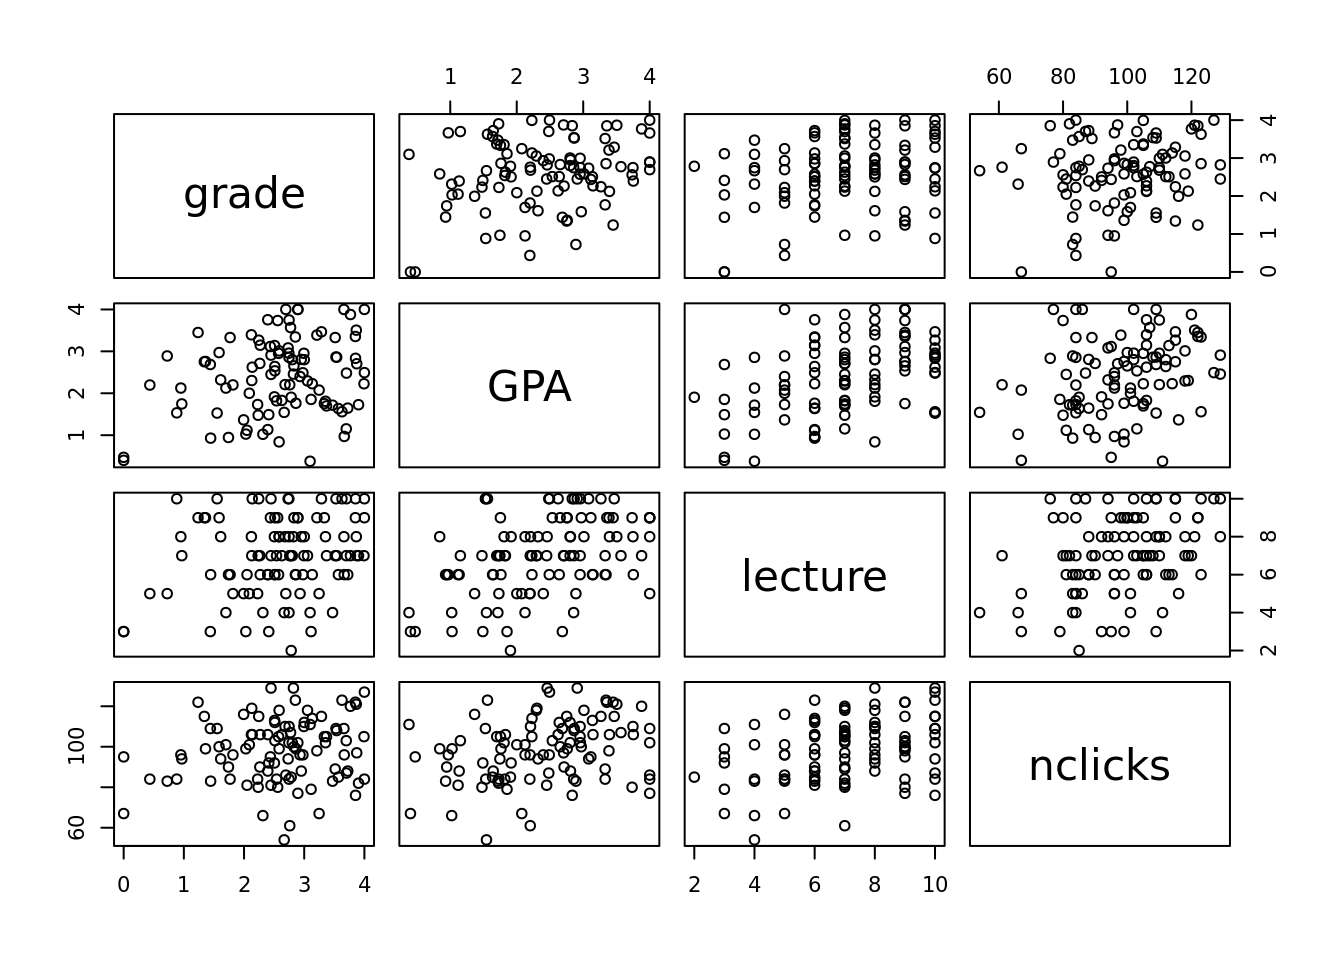 All pairwise relationships in the `grades` dataset.